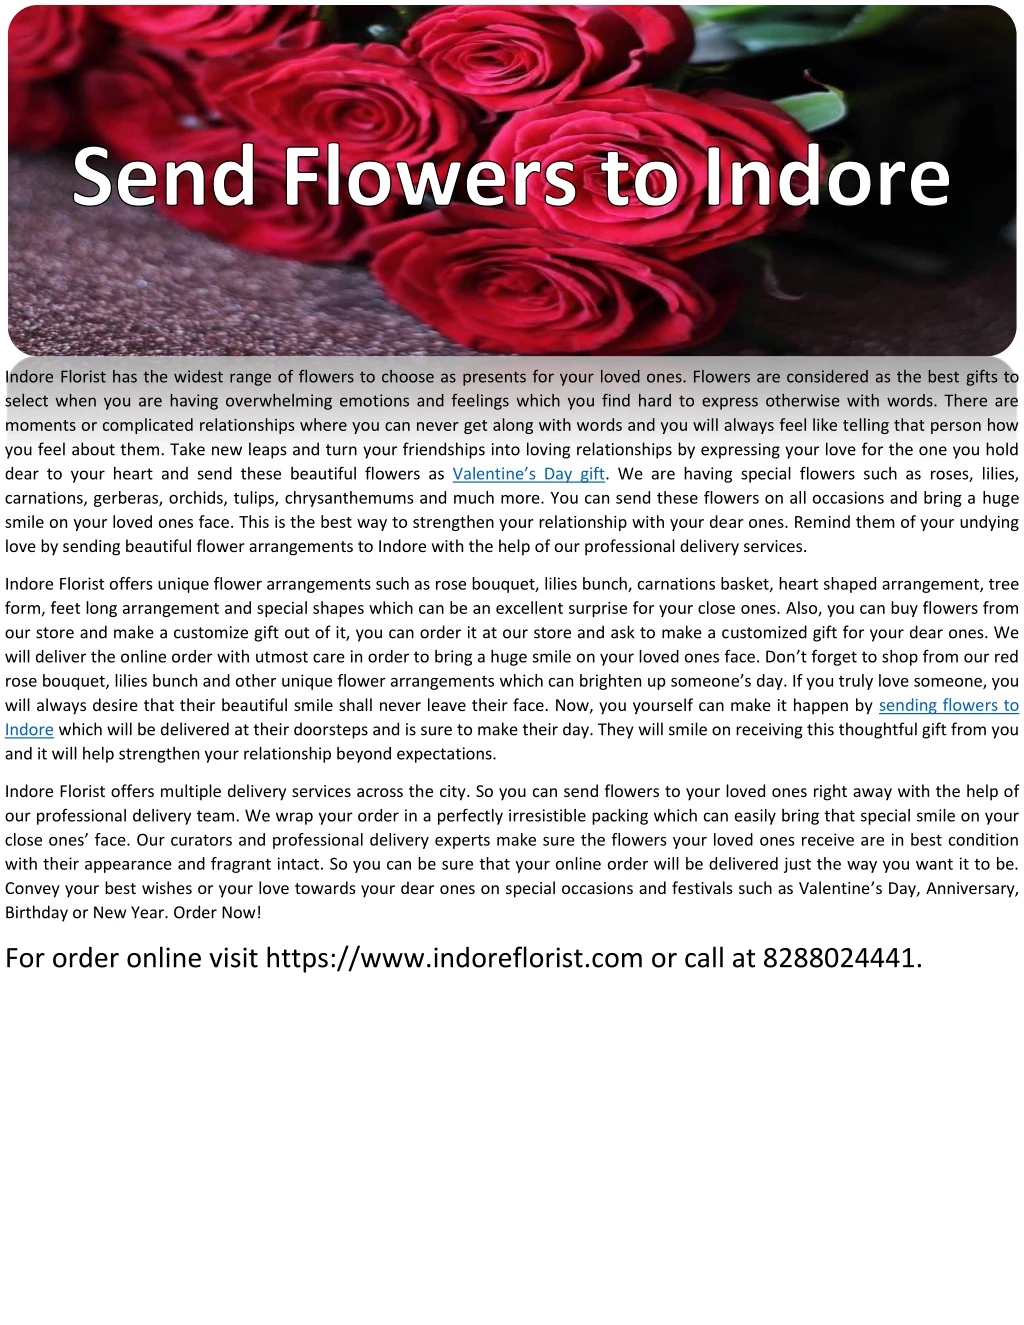 indore florist has the widest range of flowers